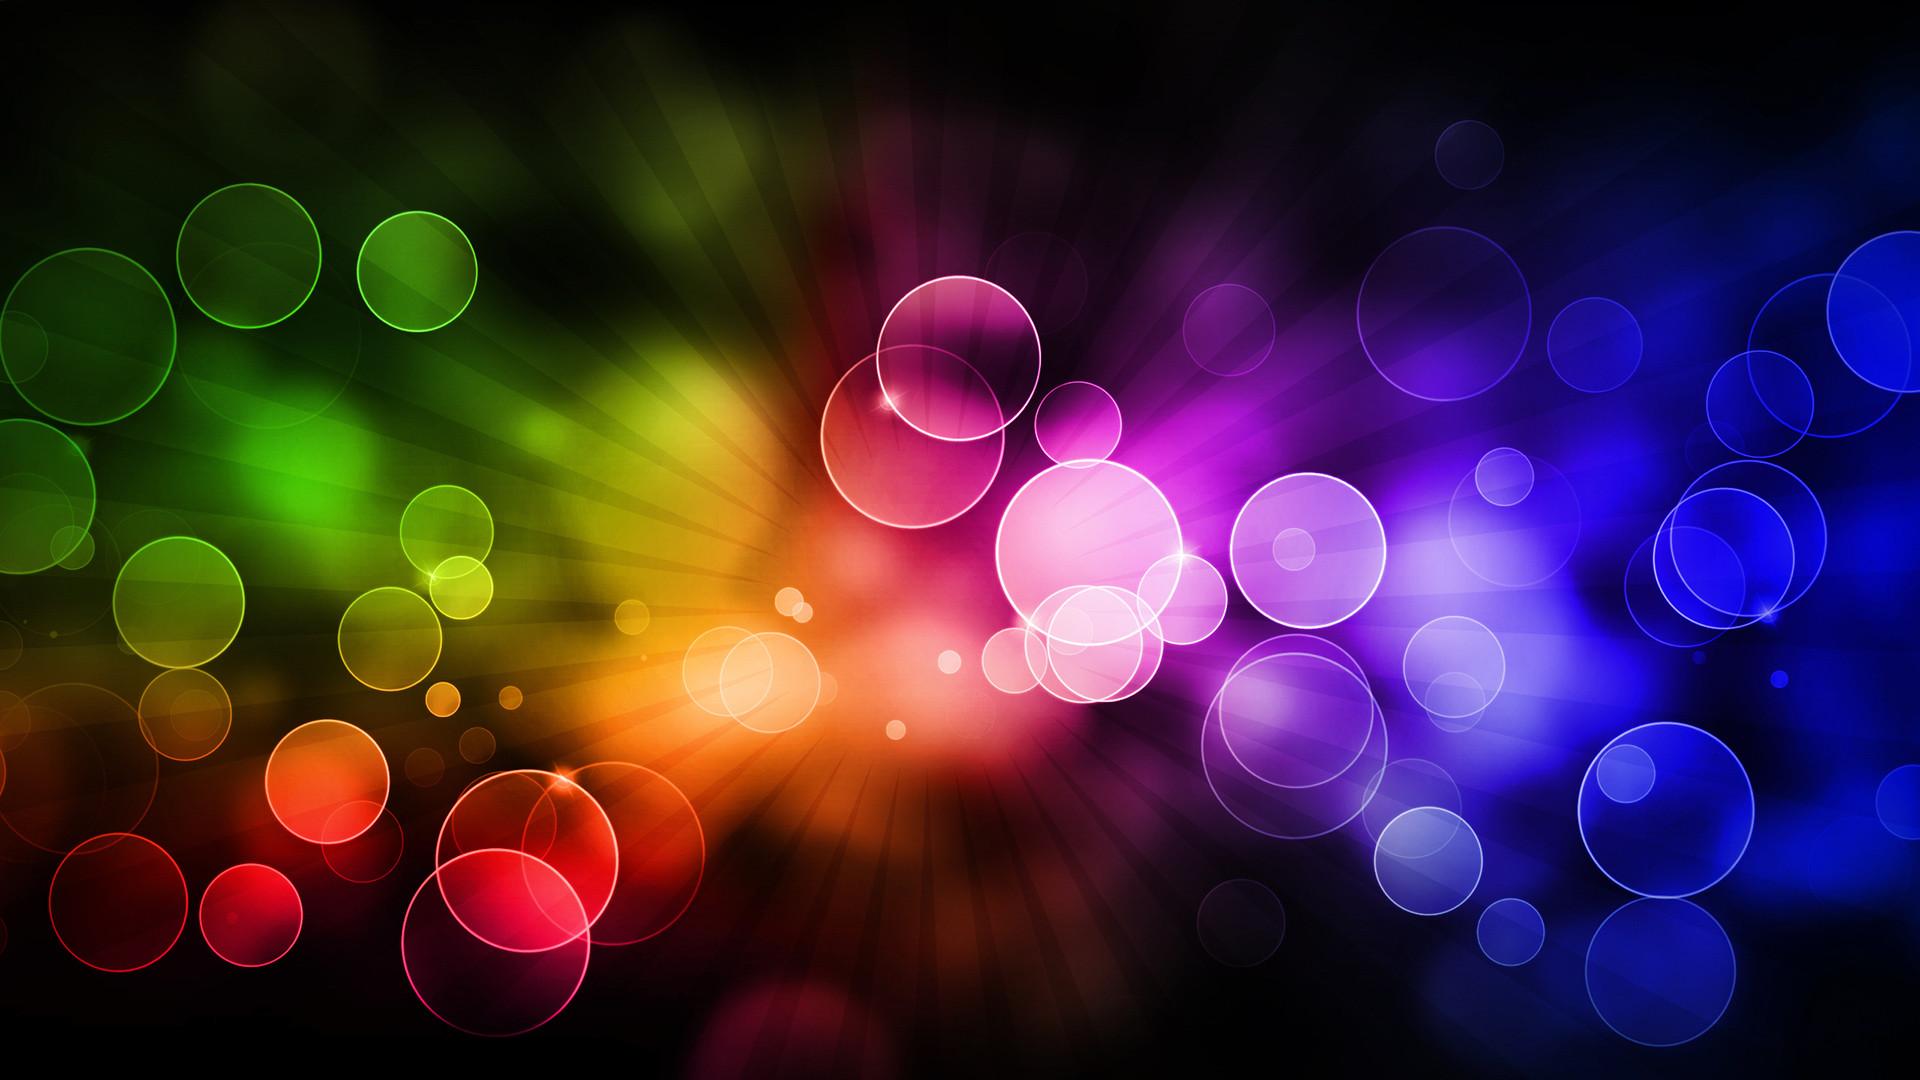 Hd Wallpaper Rainbow Cool Backgrounds Wallpapers Hd Wallpapers ...